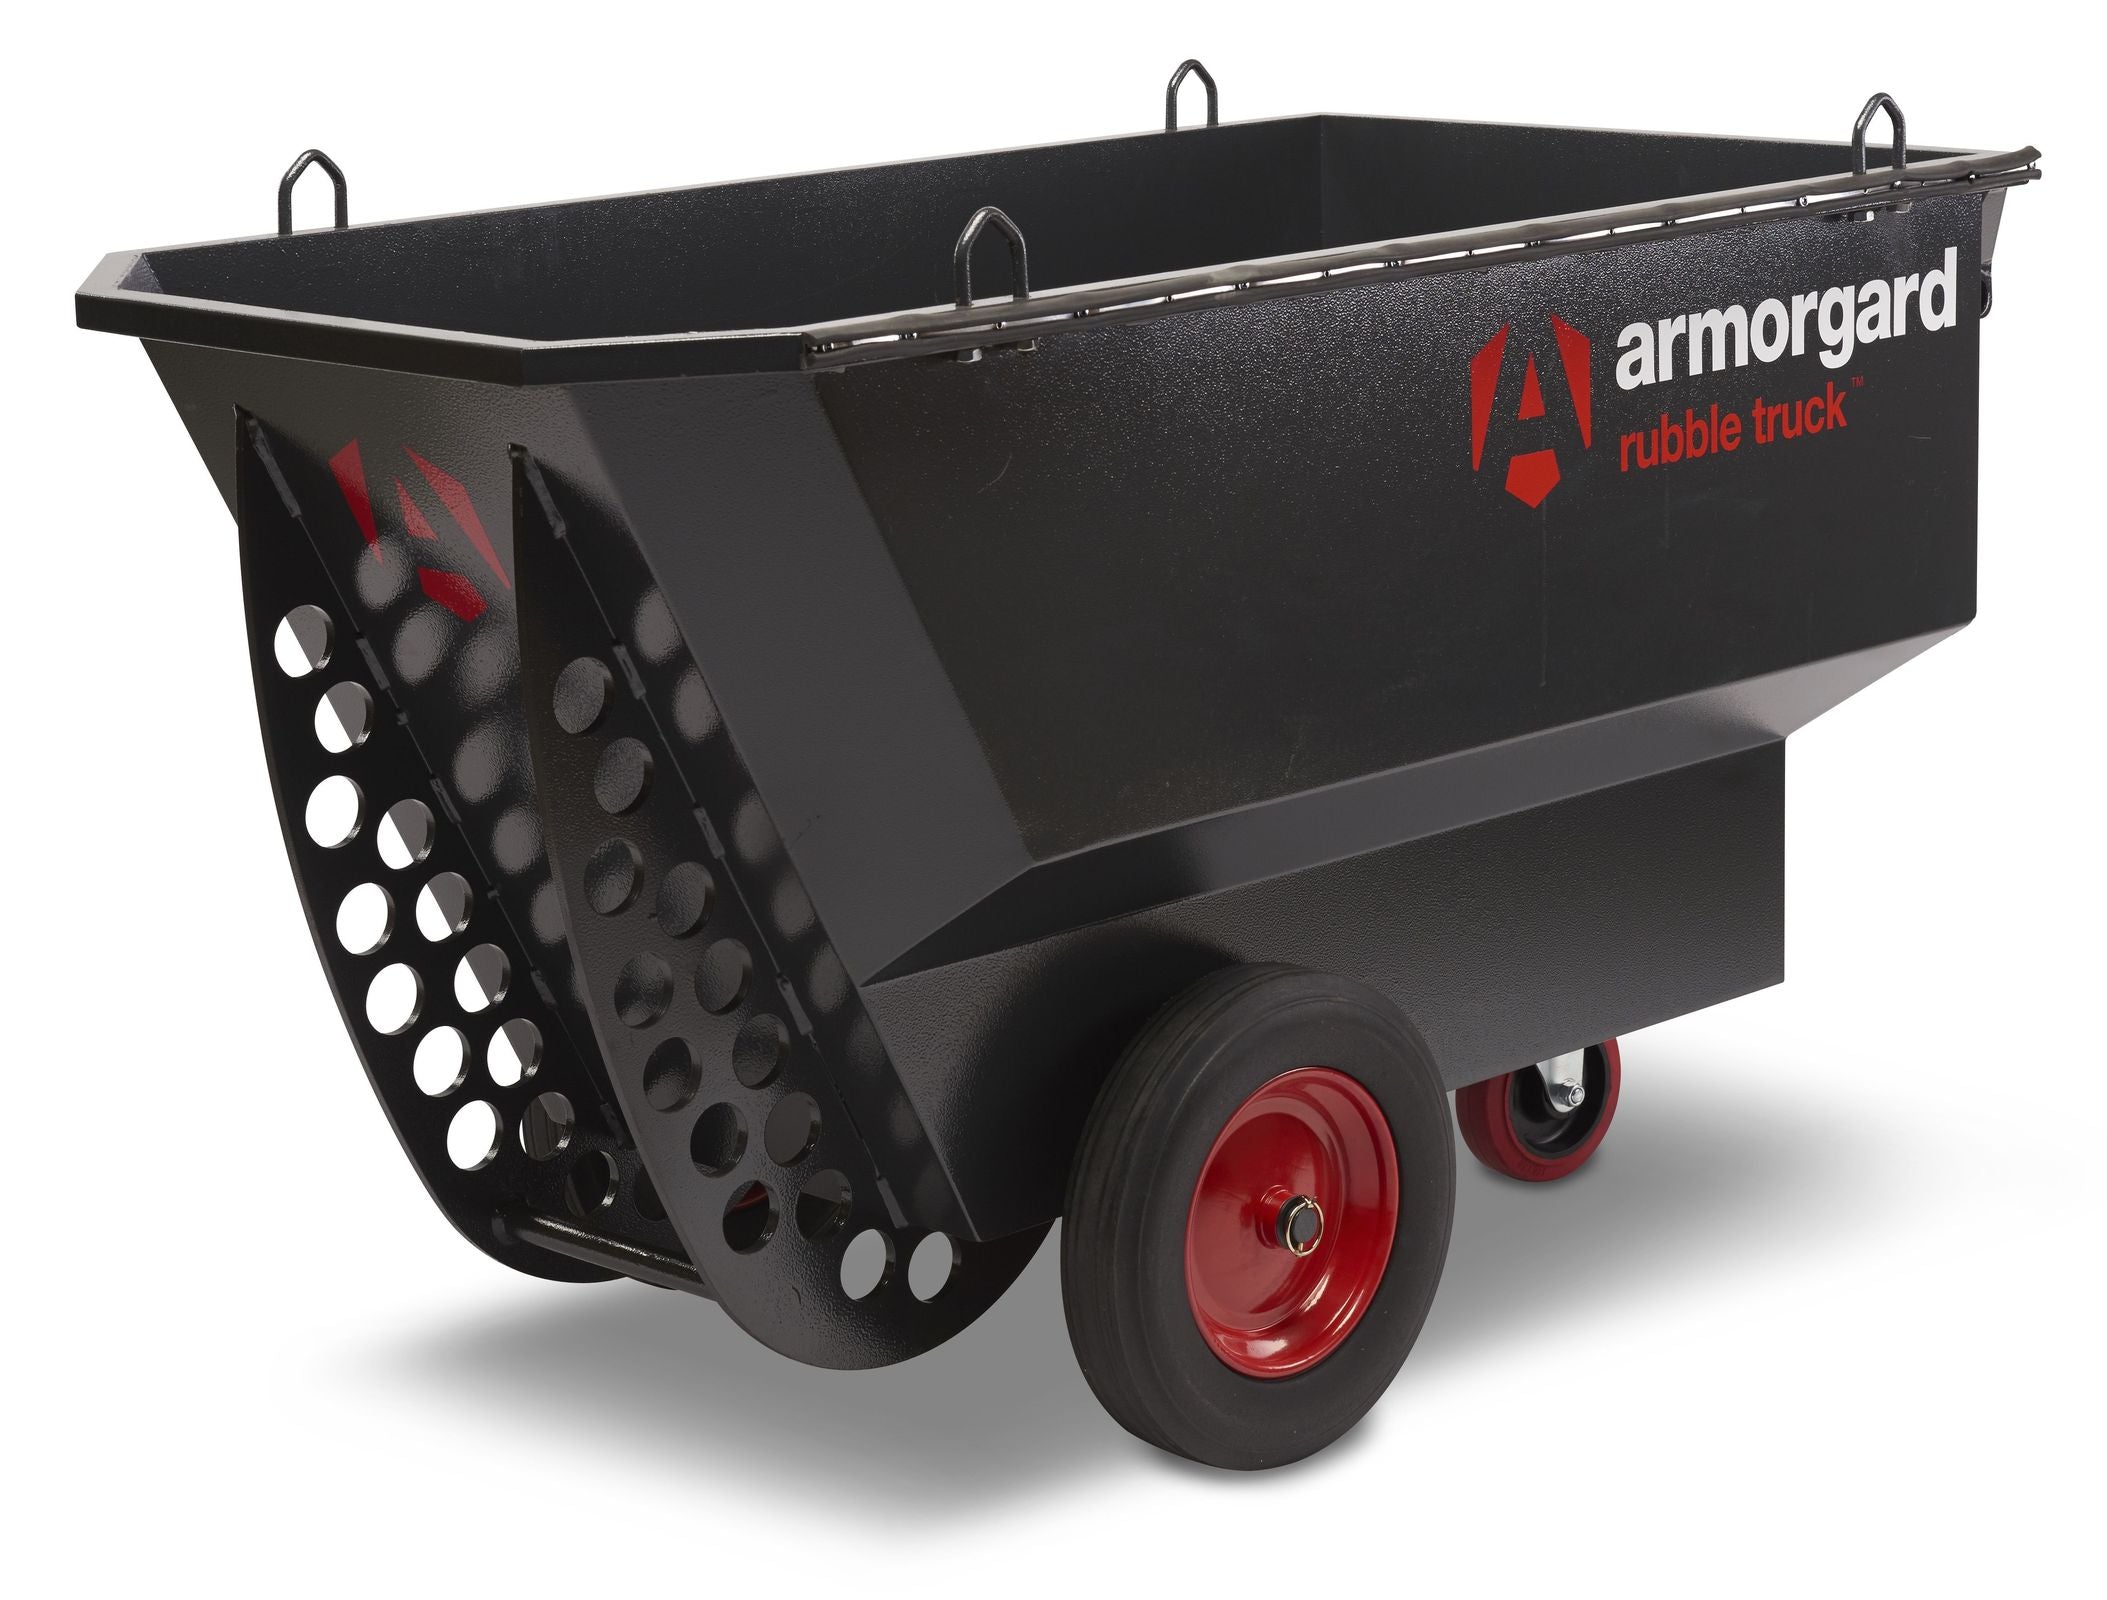 Armorgard Rubble Truck RT Side View